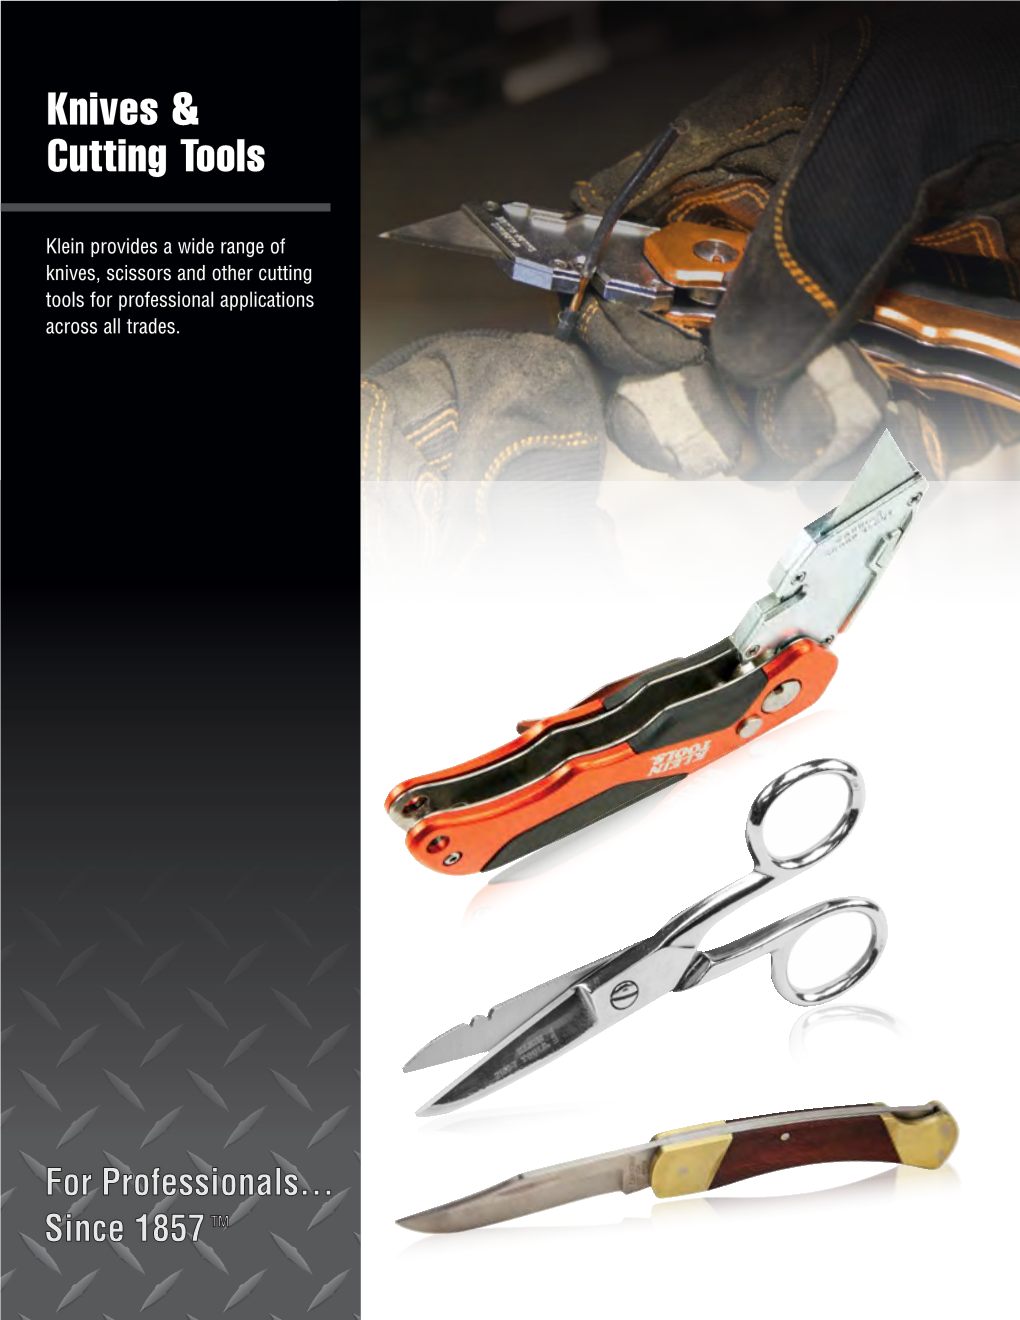 Knives & Cutting Tools